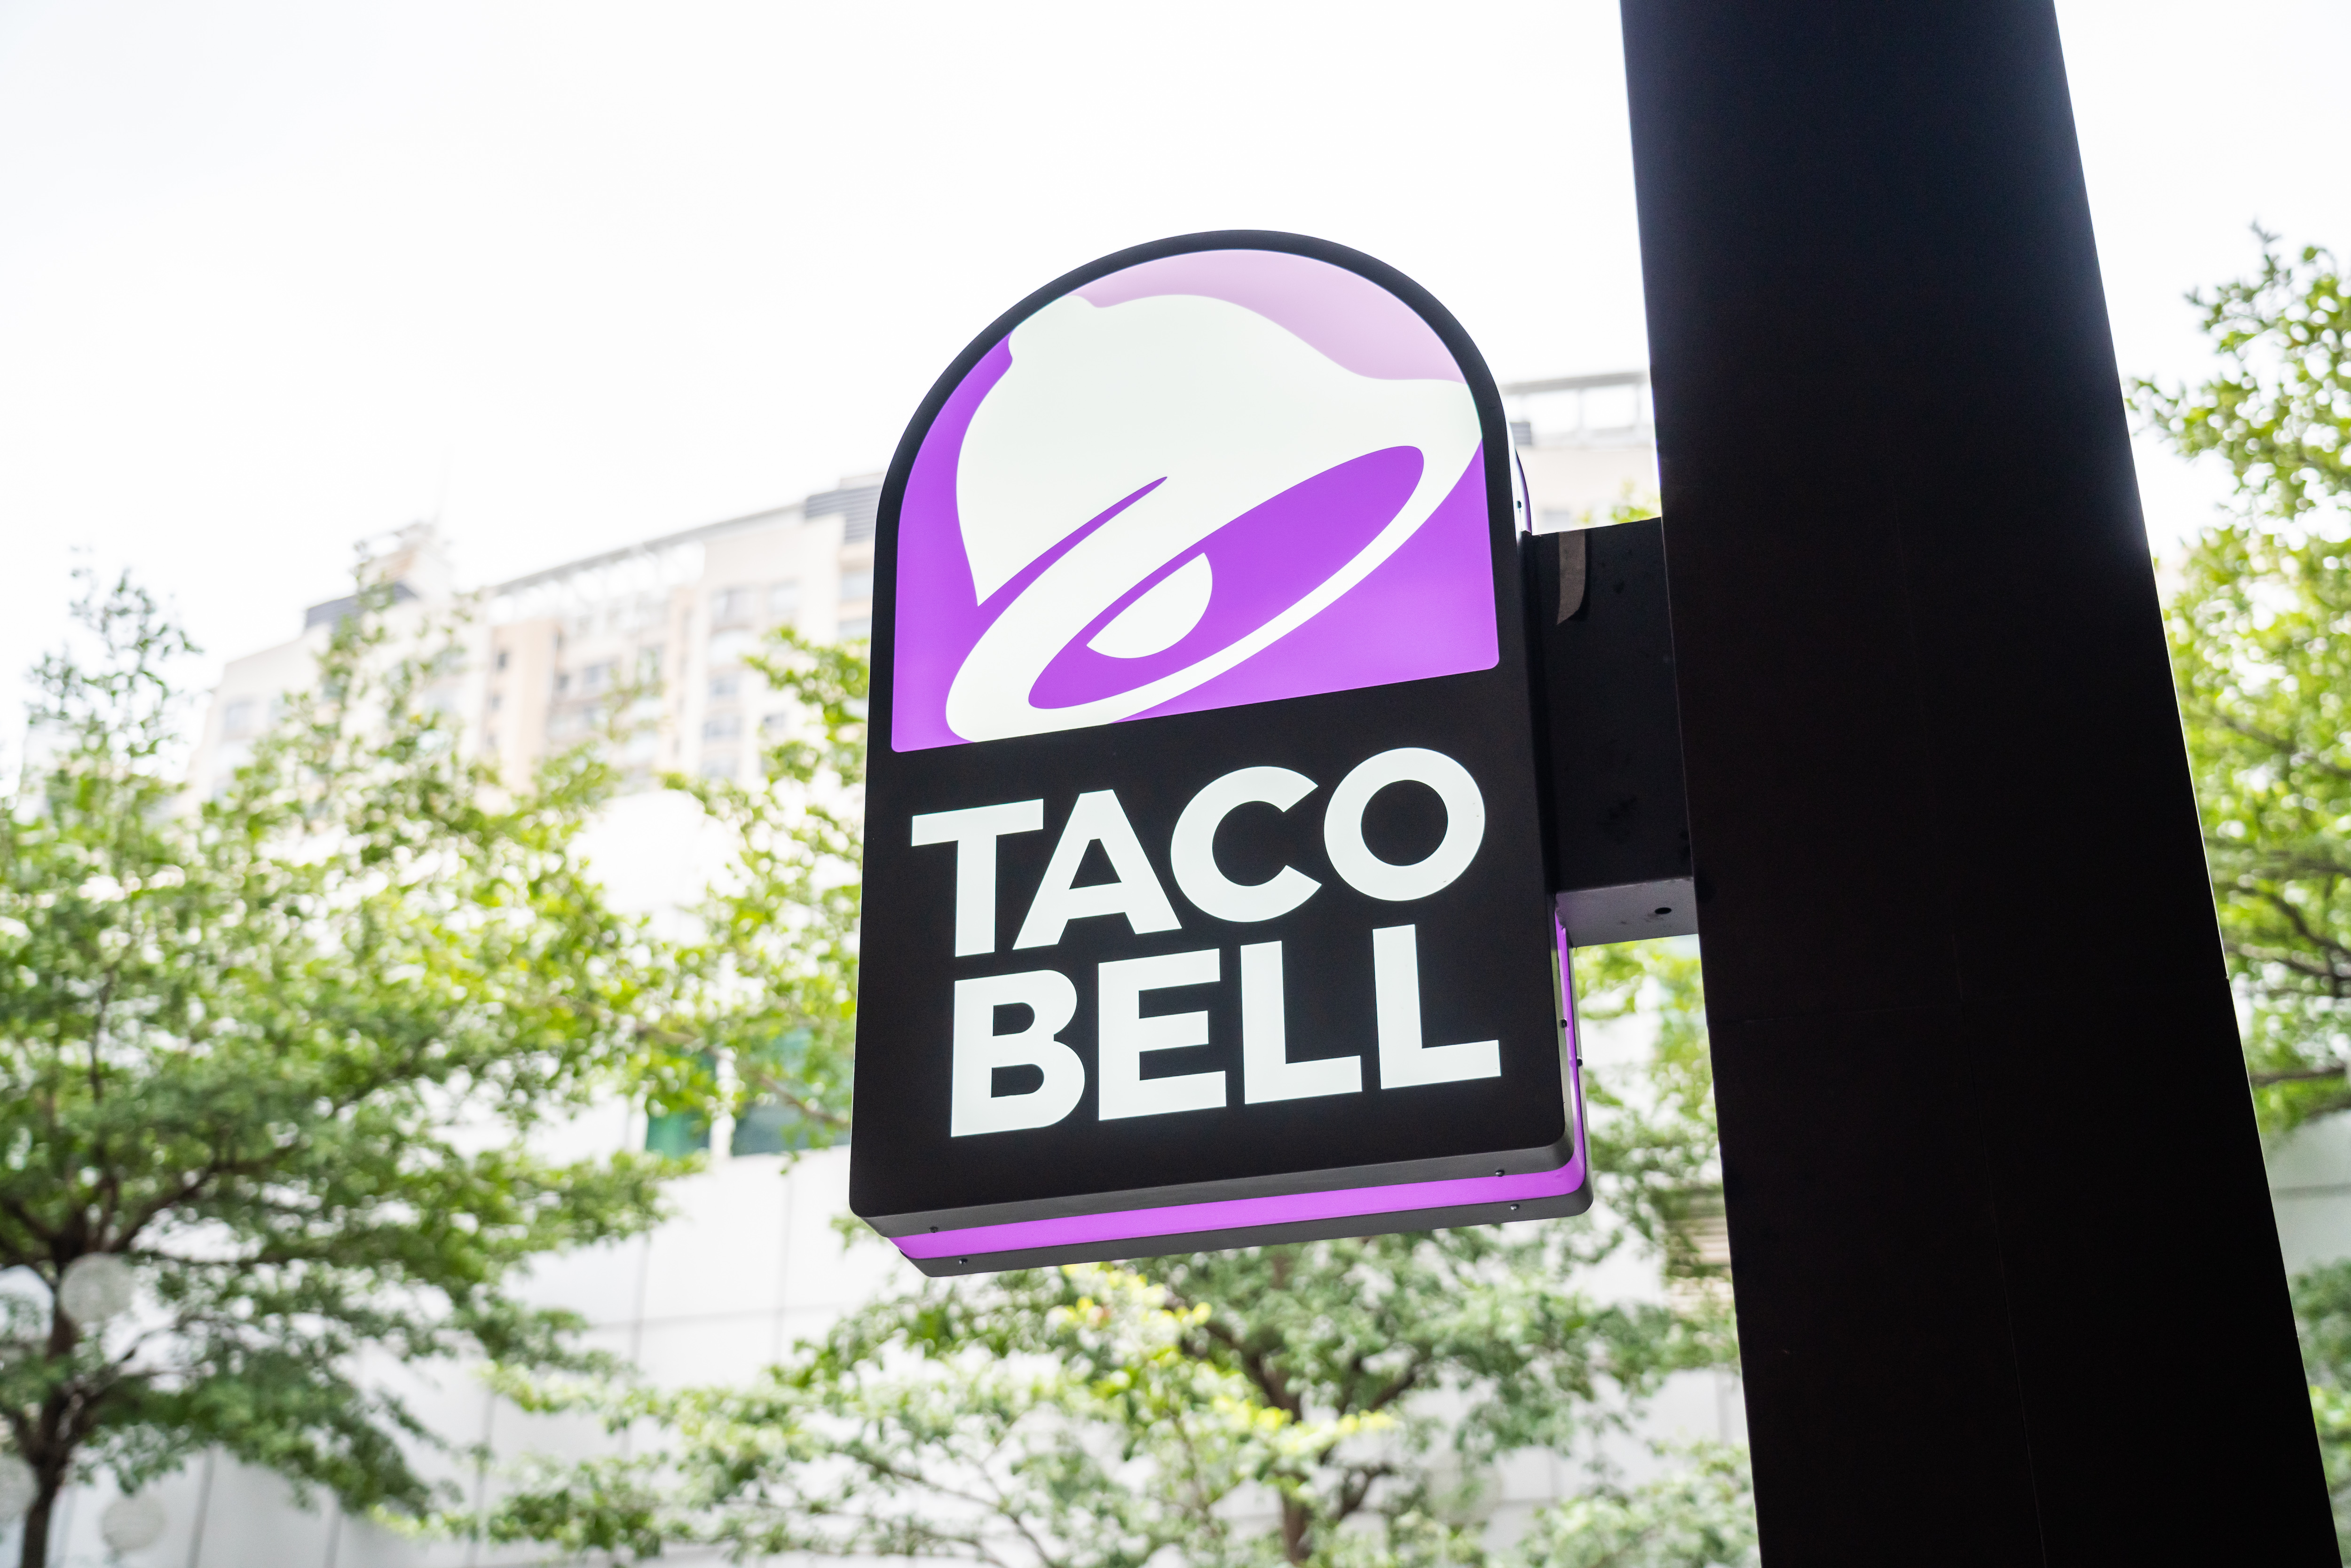 Taco Bell Franchise Location